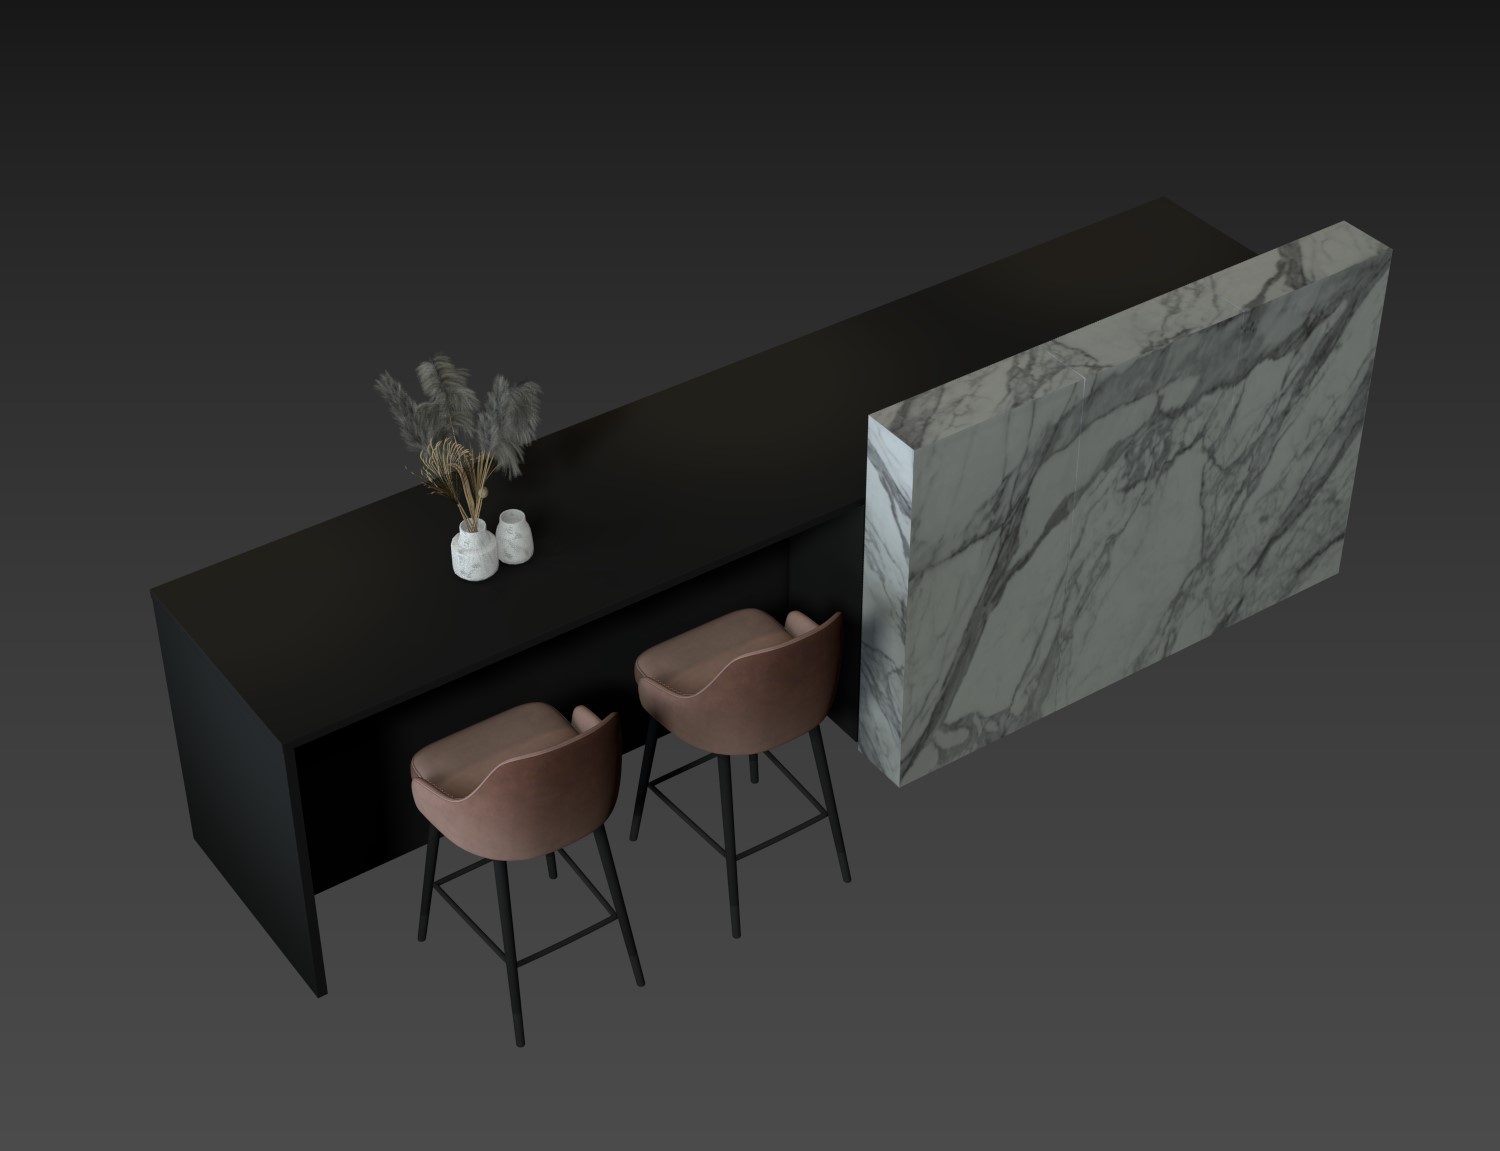 10148. Download Free Table Bar Model by Huy Hieu Lee